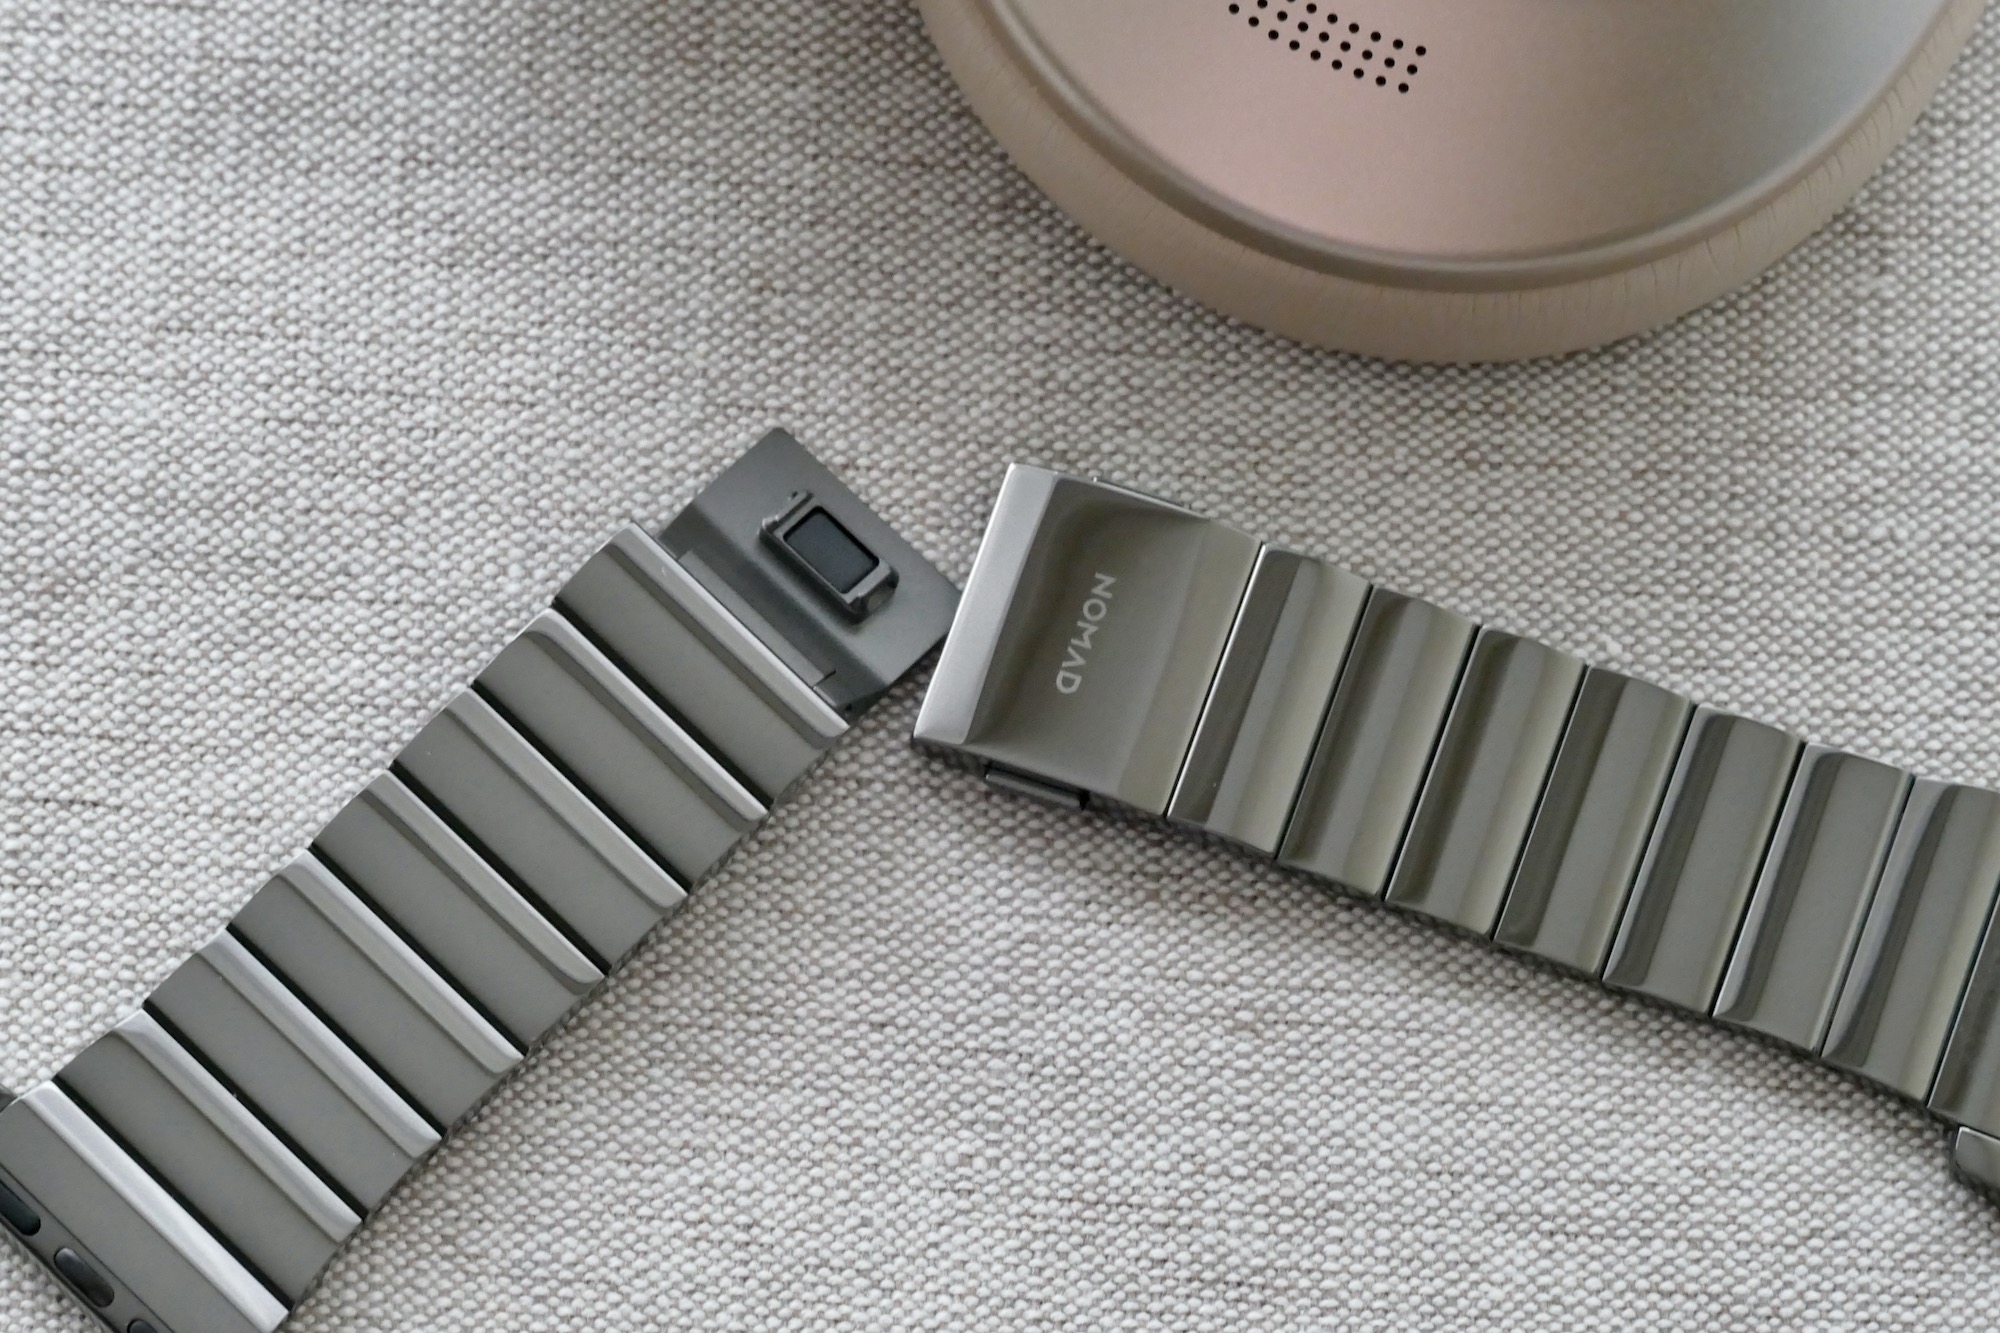 nomad titanium steel band apple watch hands on photos price release date magnet clasp